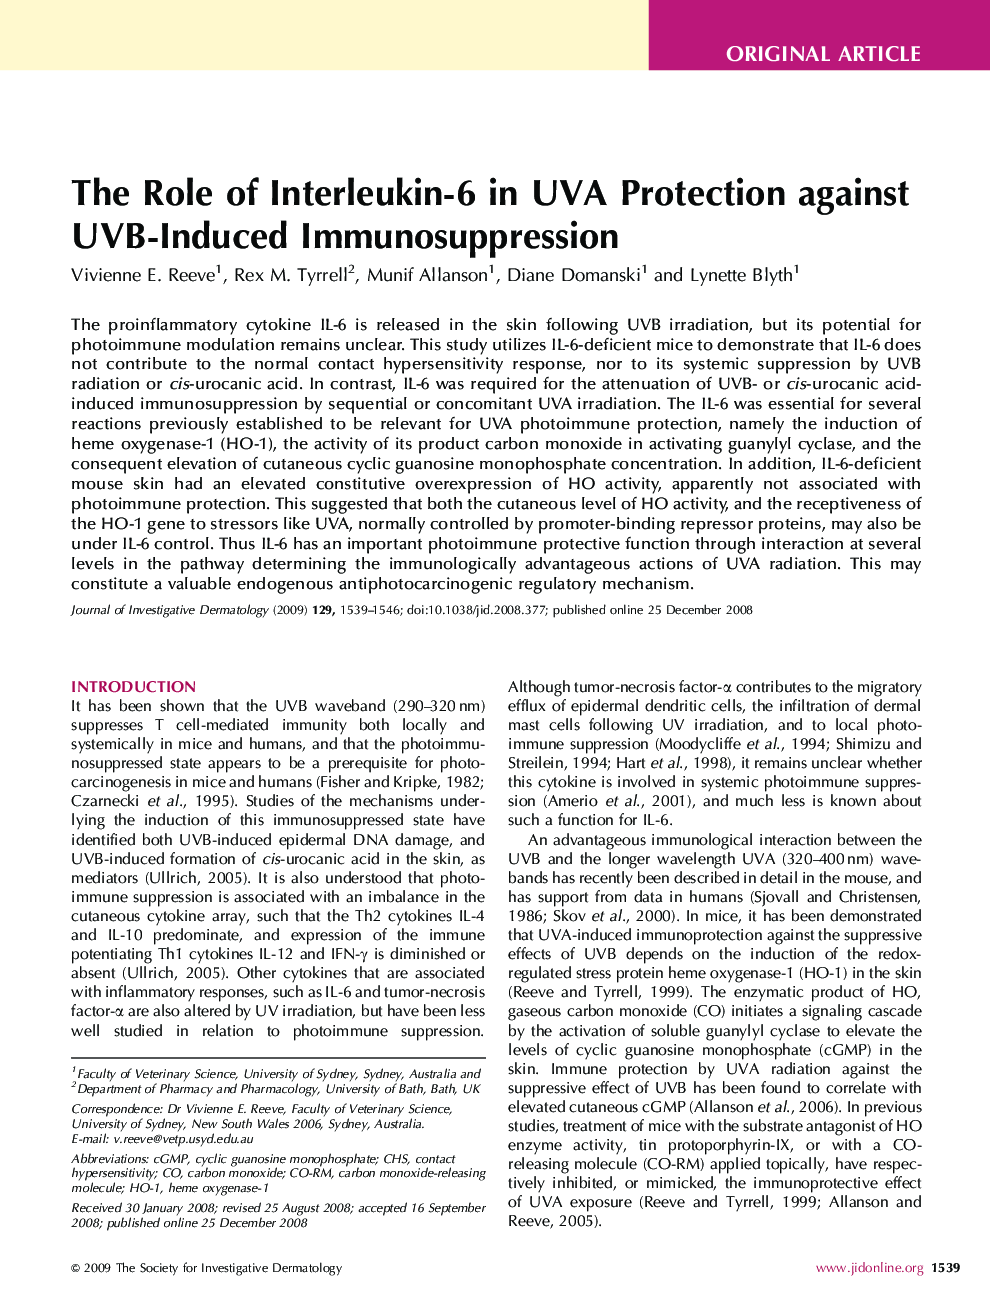 The Role of Interleukin-6 in UVA Protection against UVB-Induced Immunosuppression